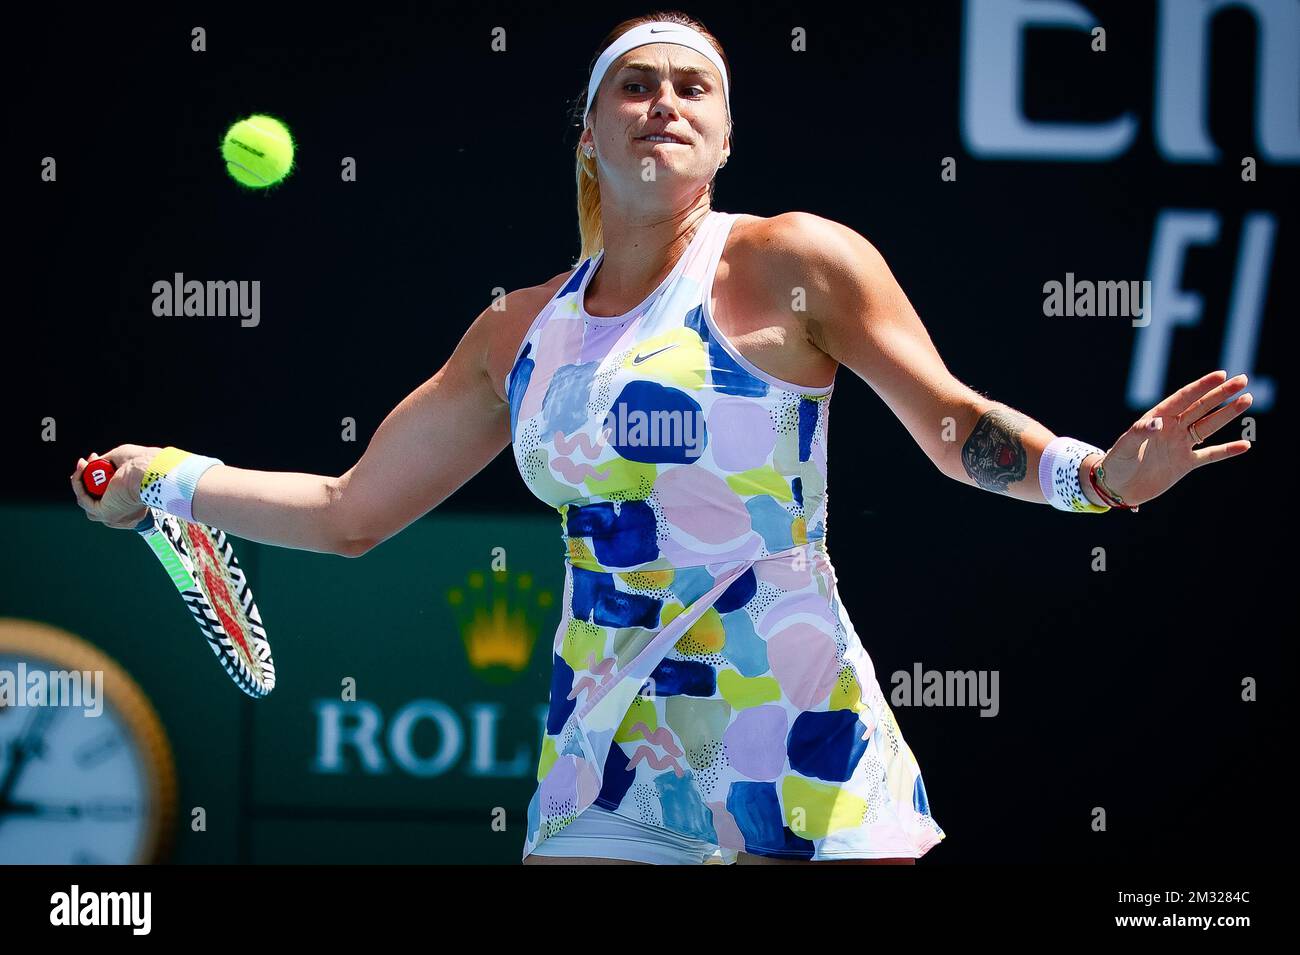 Belarussian Aryna Sabalenka pictured during a tennis match between Belgian-Belarussian pair Mertens-Sabalenka and Chinese Taipei pair Hao-Ching Chan and Latisha Chan, in the quarterfinals of the women's doubles competition of the 'Australian Open' tennis Grand Slam, Tuesday 28 January 2020 in Melbourne Park, Melbourne, Australia. Stock Photo